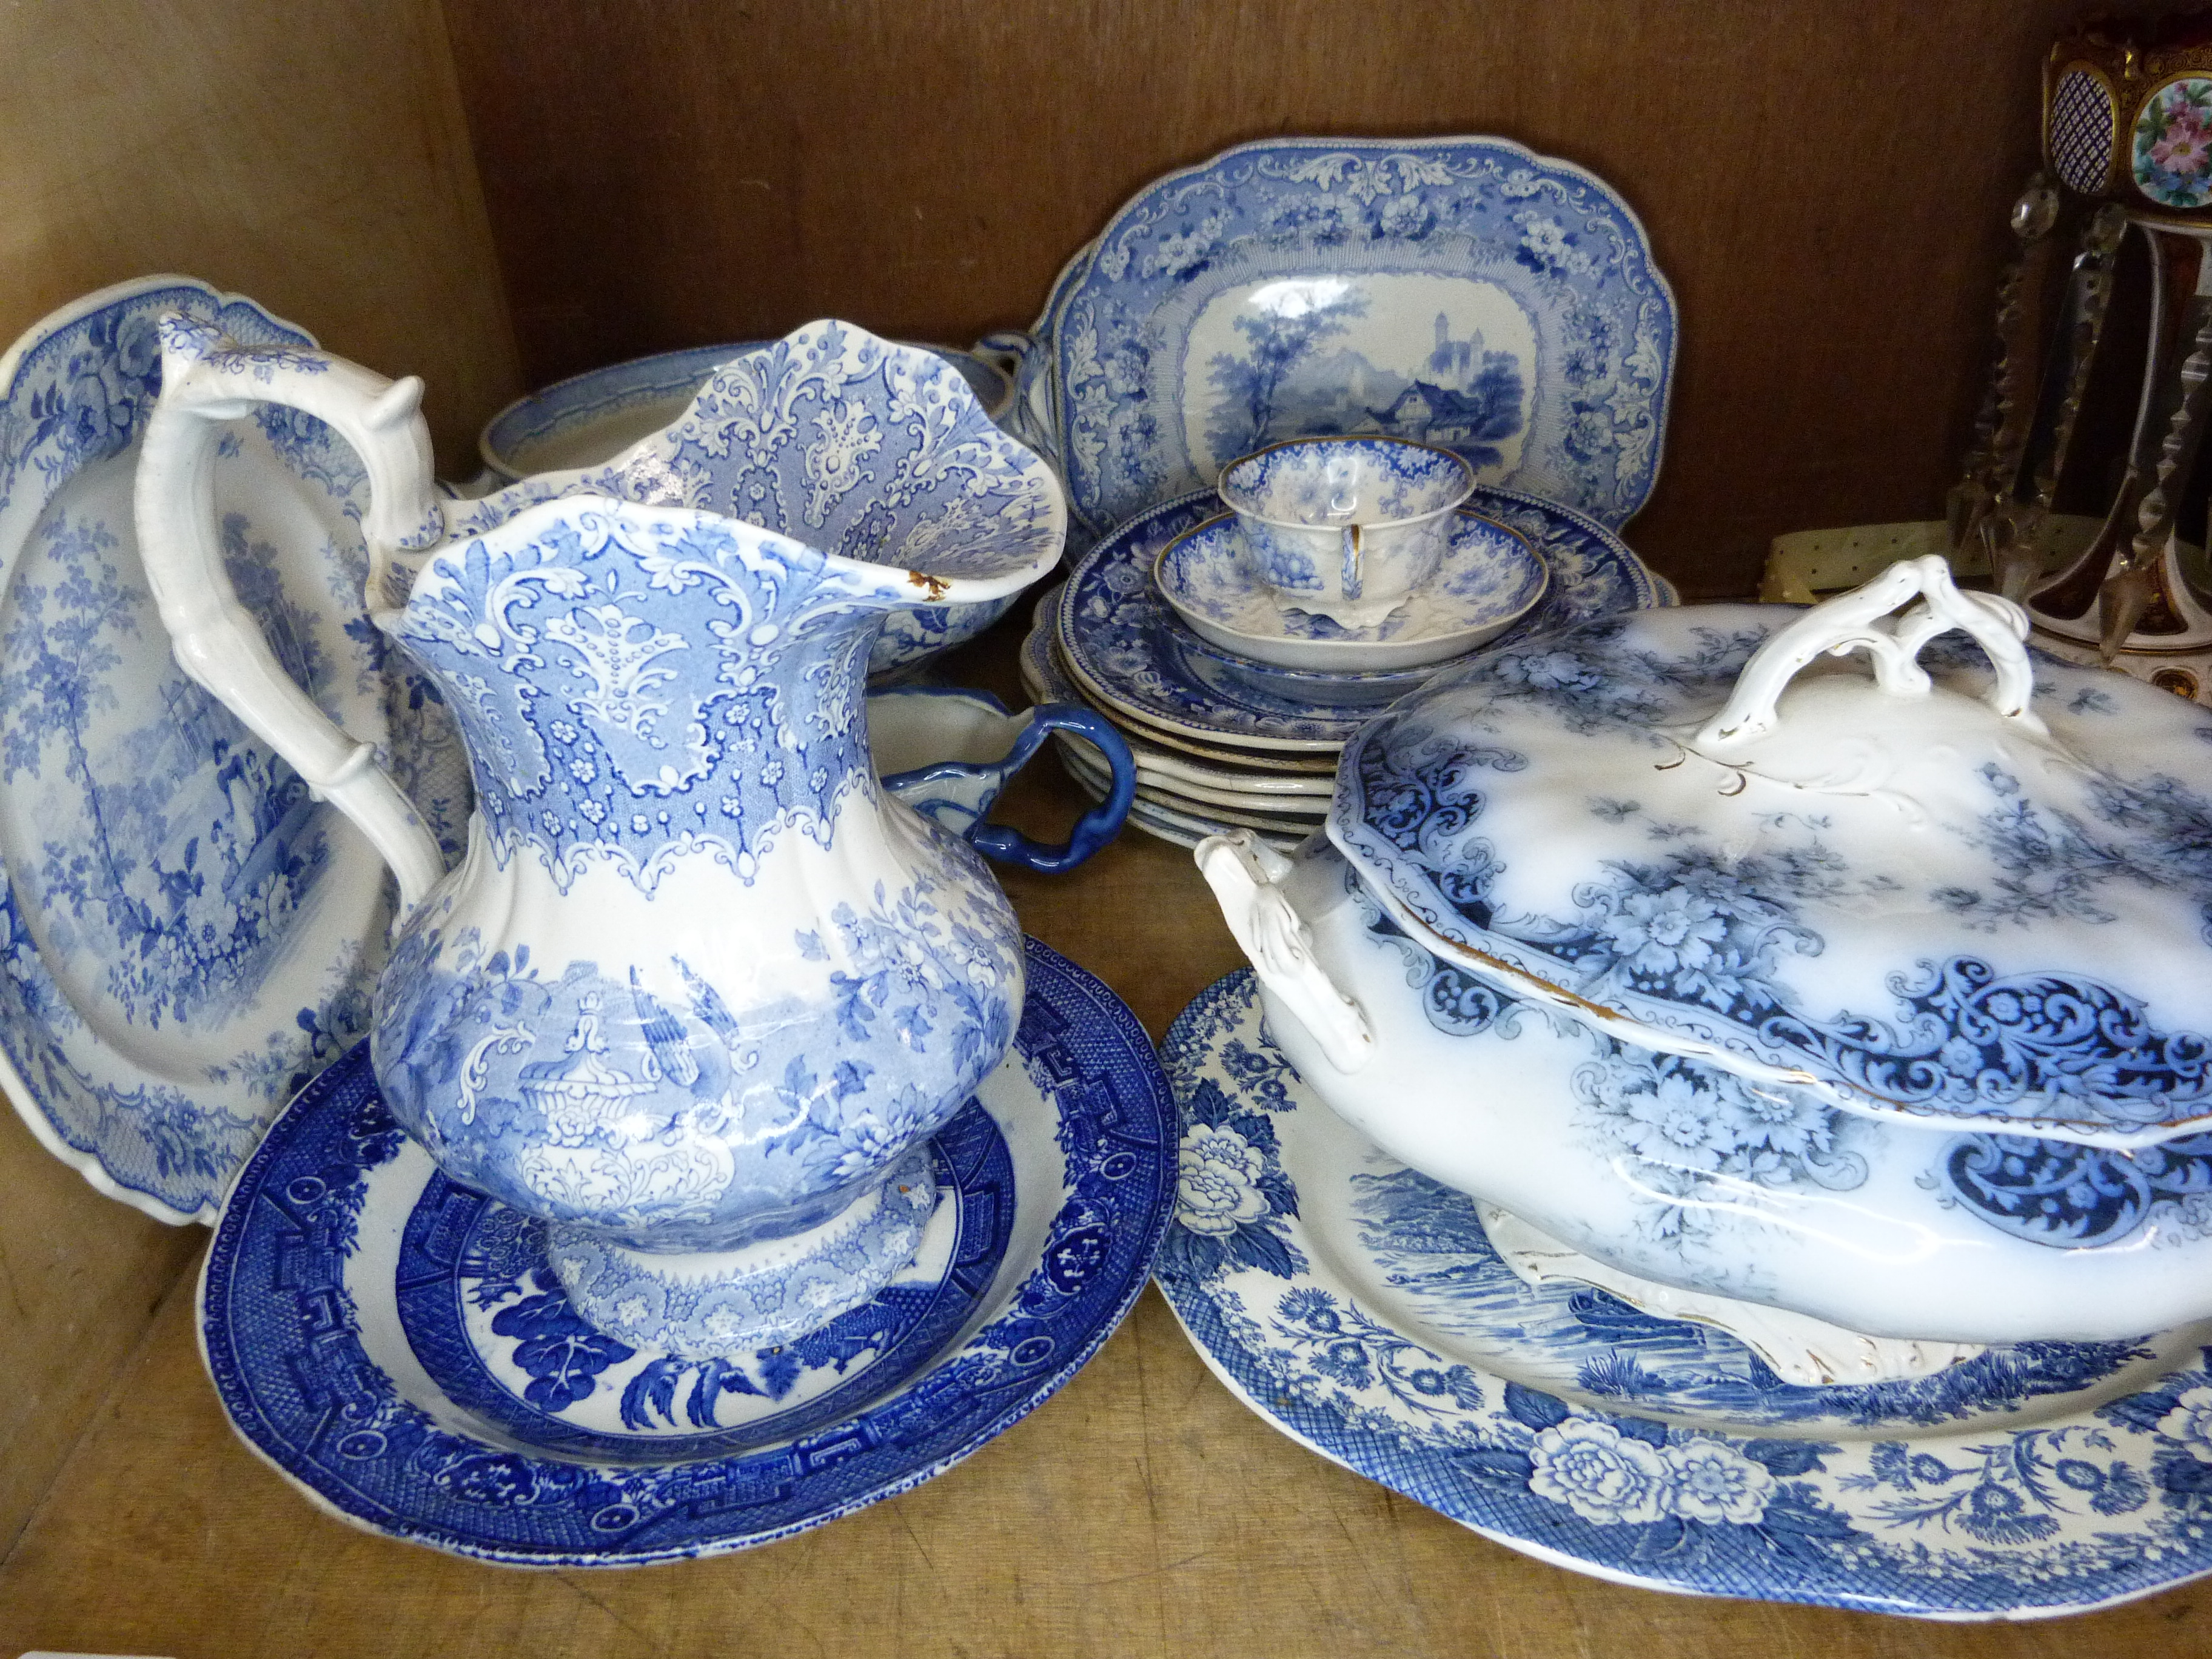 Victorian and later blue and white ware including jug, tureen, plates etc